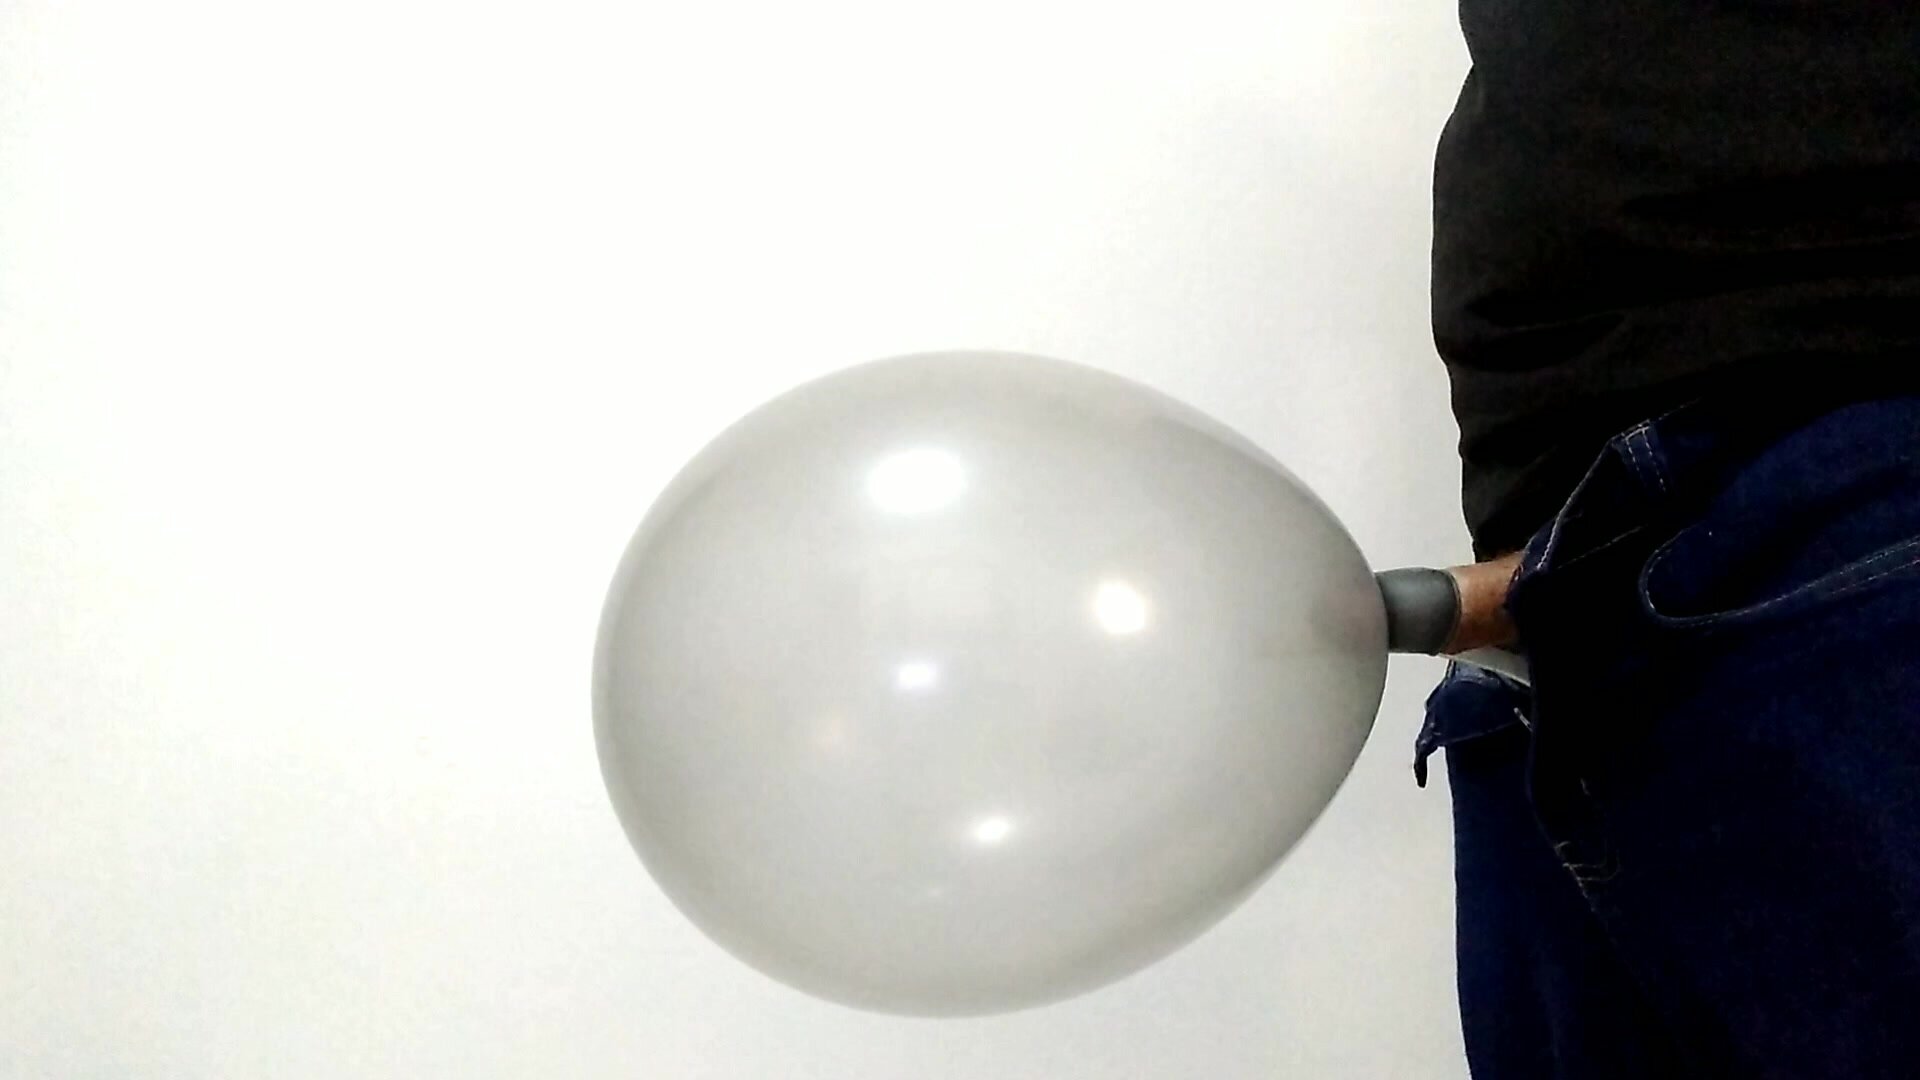 Blowing a balloon in my cock